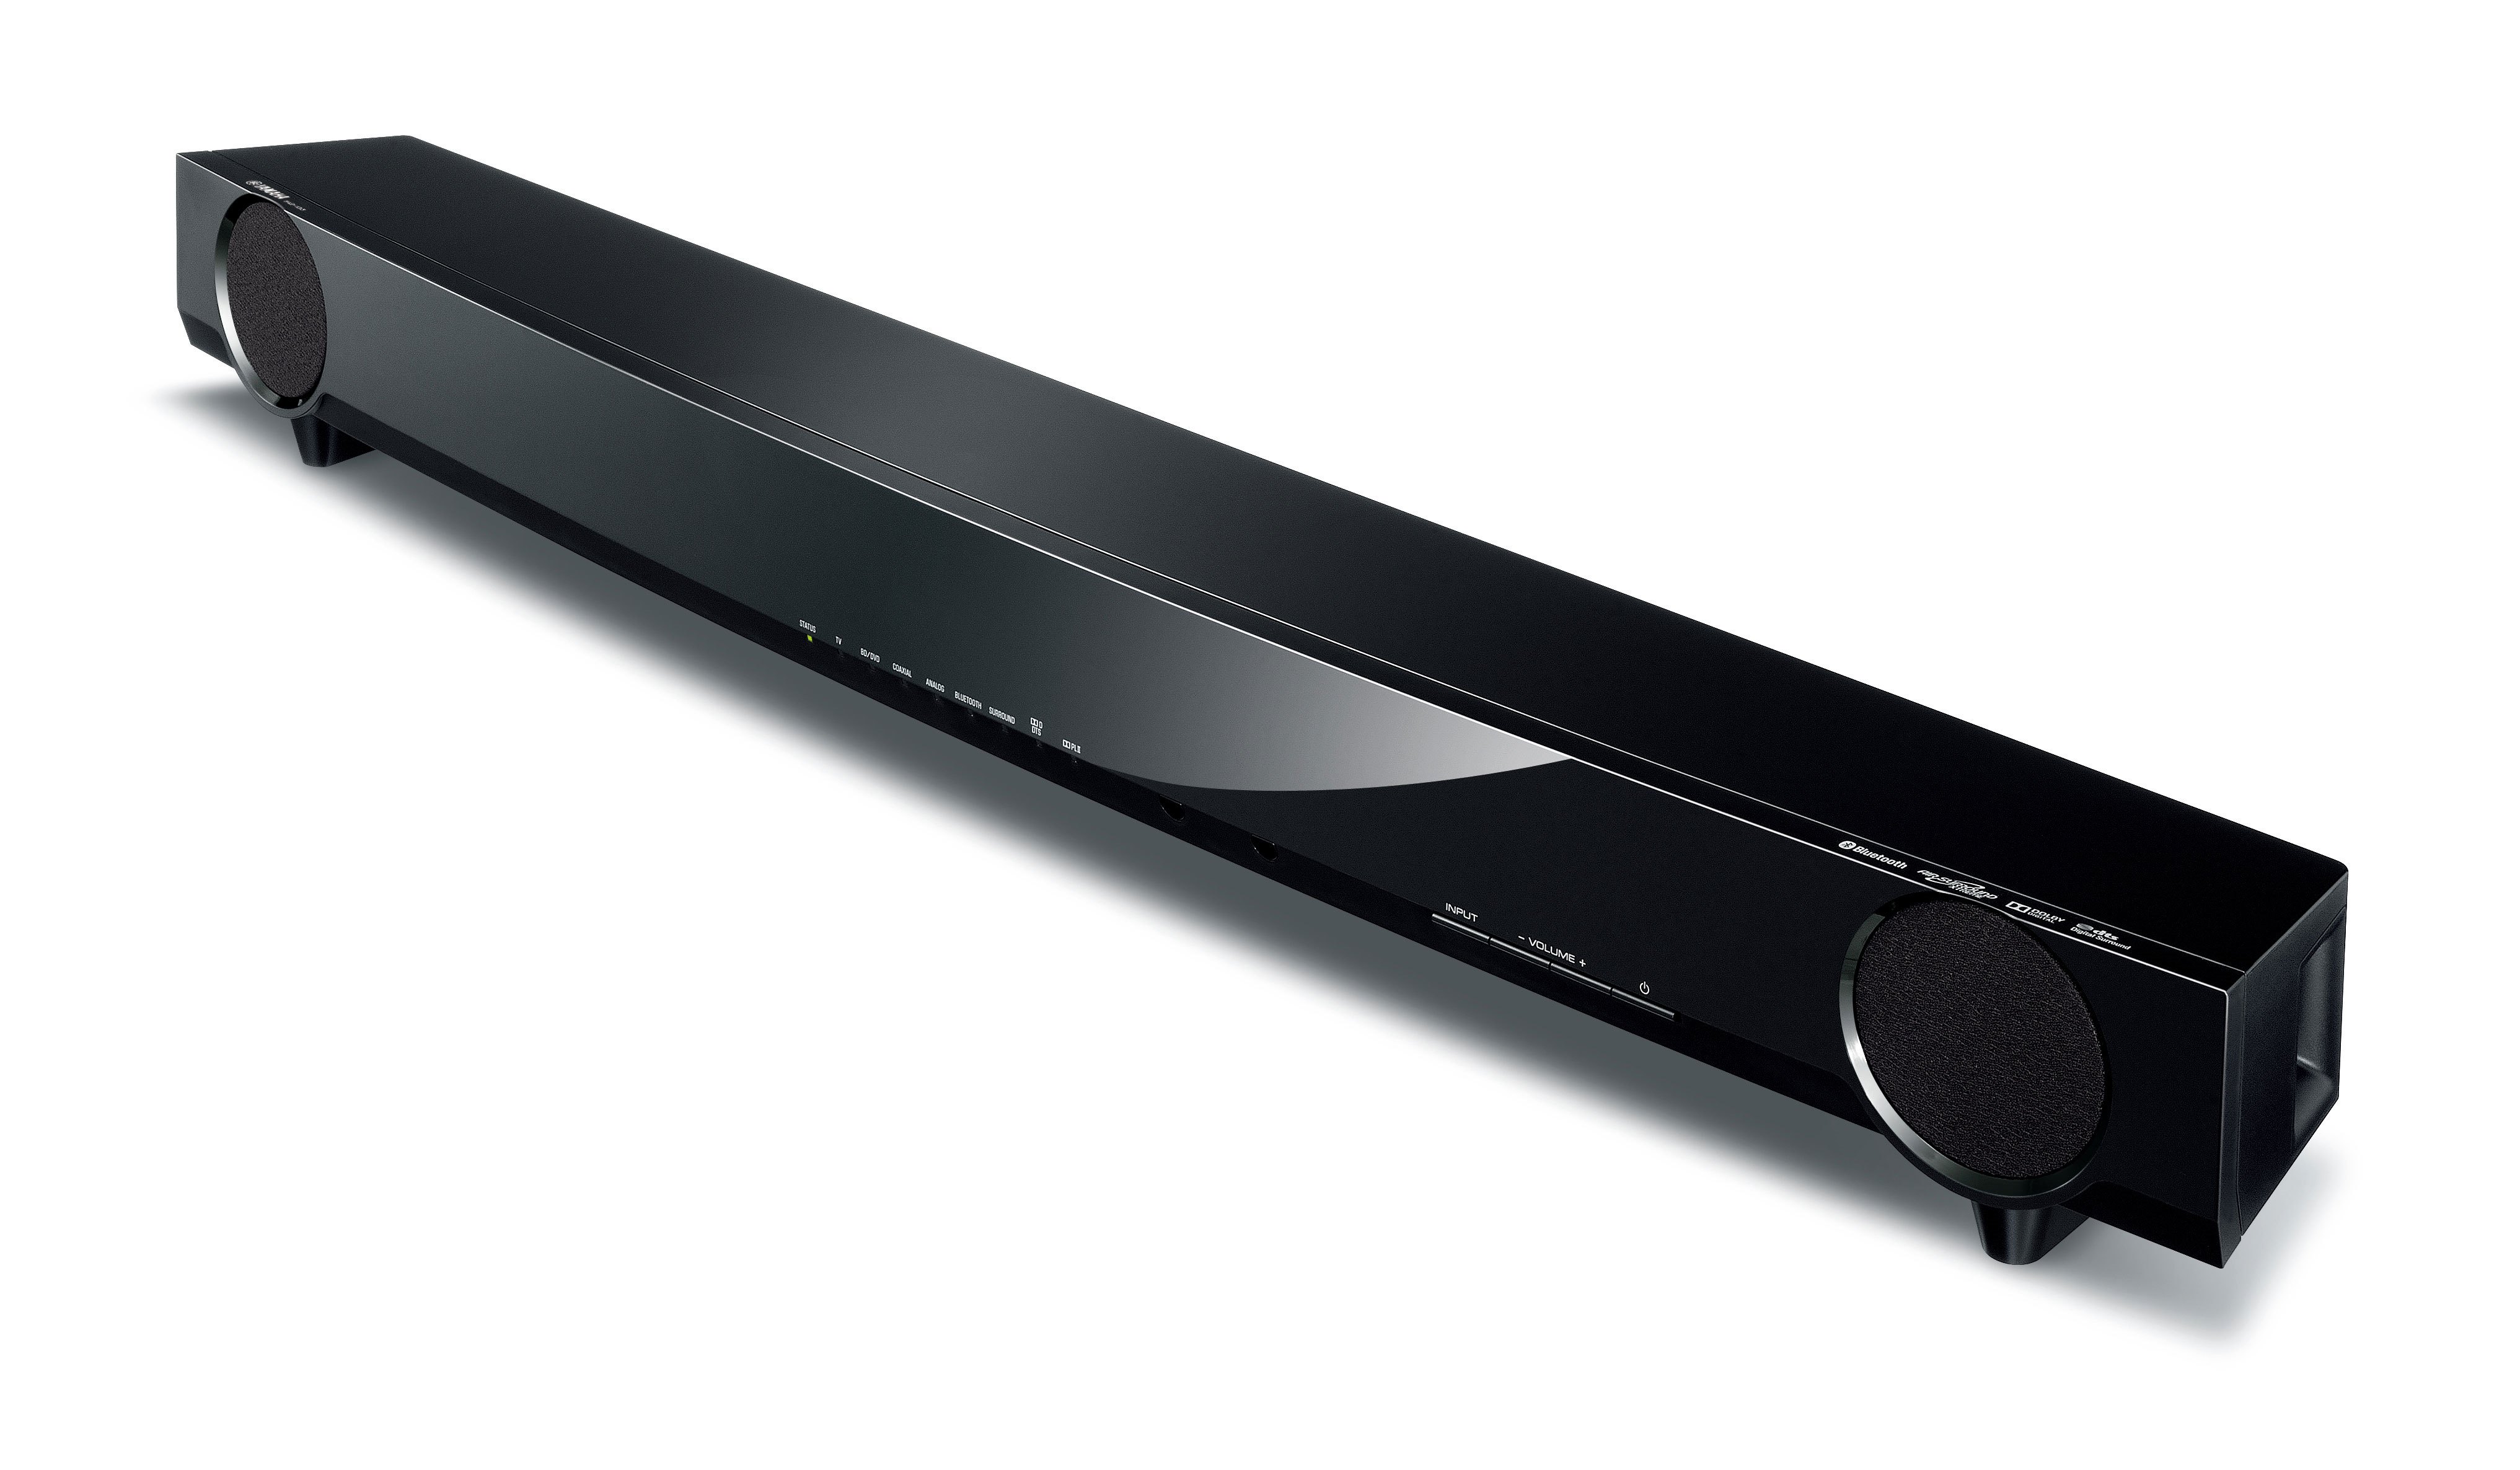 YAS-103 - Overview - Sound Bars - Audio & Visual - Products 